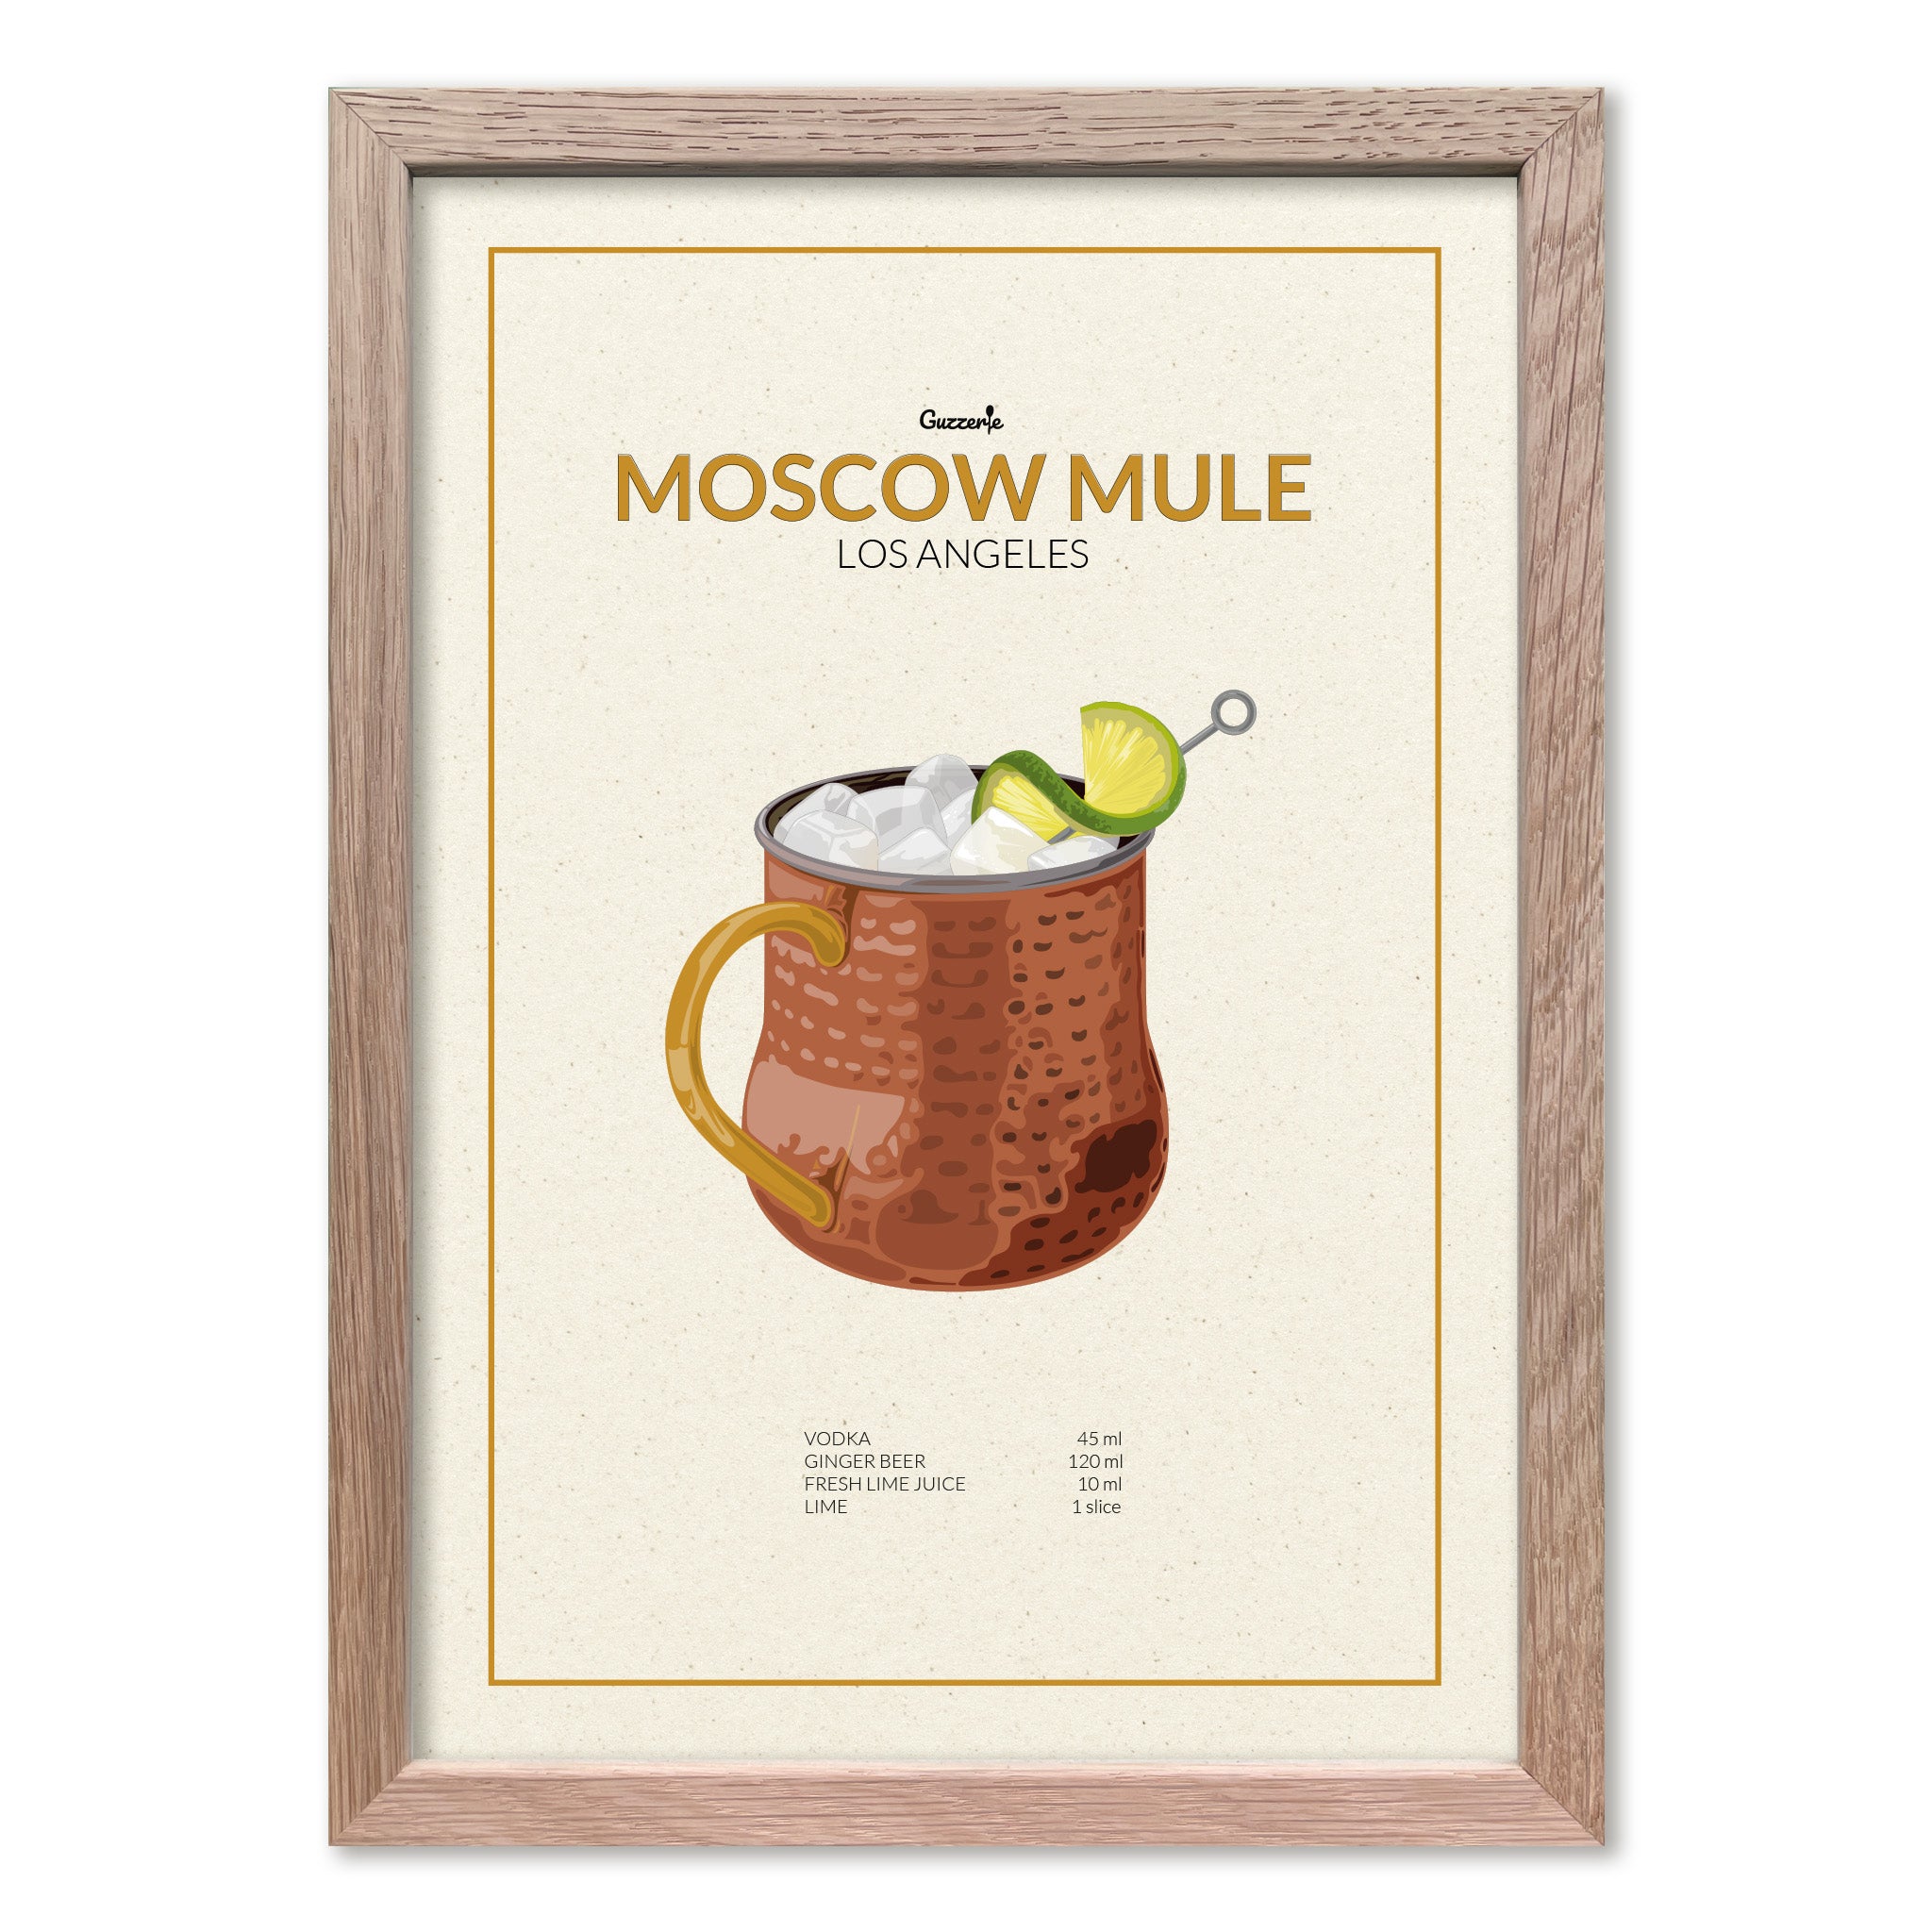 Iconic Poster of Moscow Mule Cocktail | Guzzerie